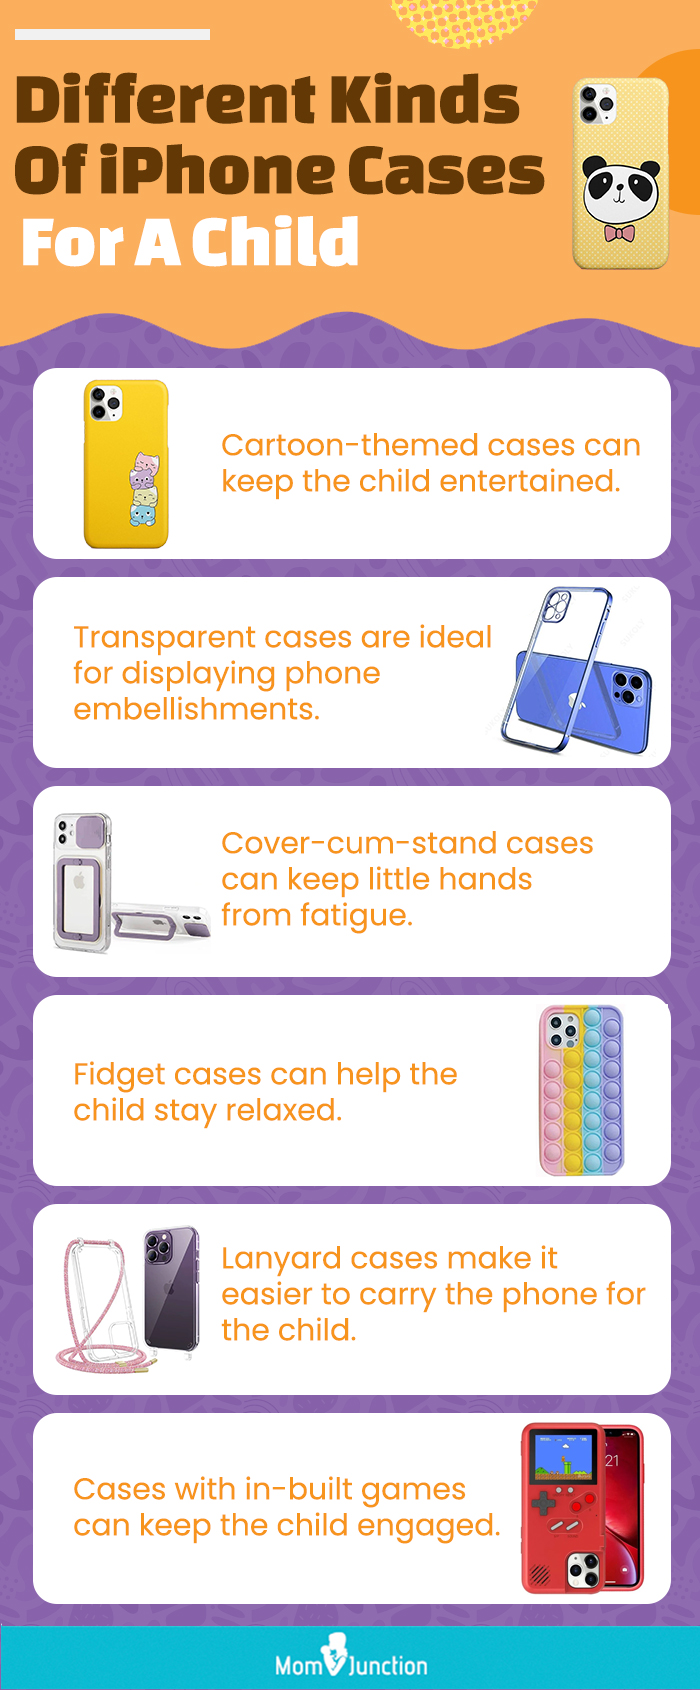 Different Kinds Of iPhone Cases For A Child (infographic)